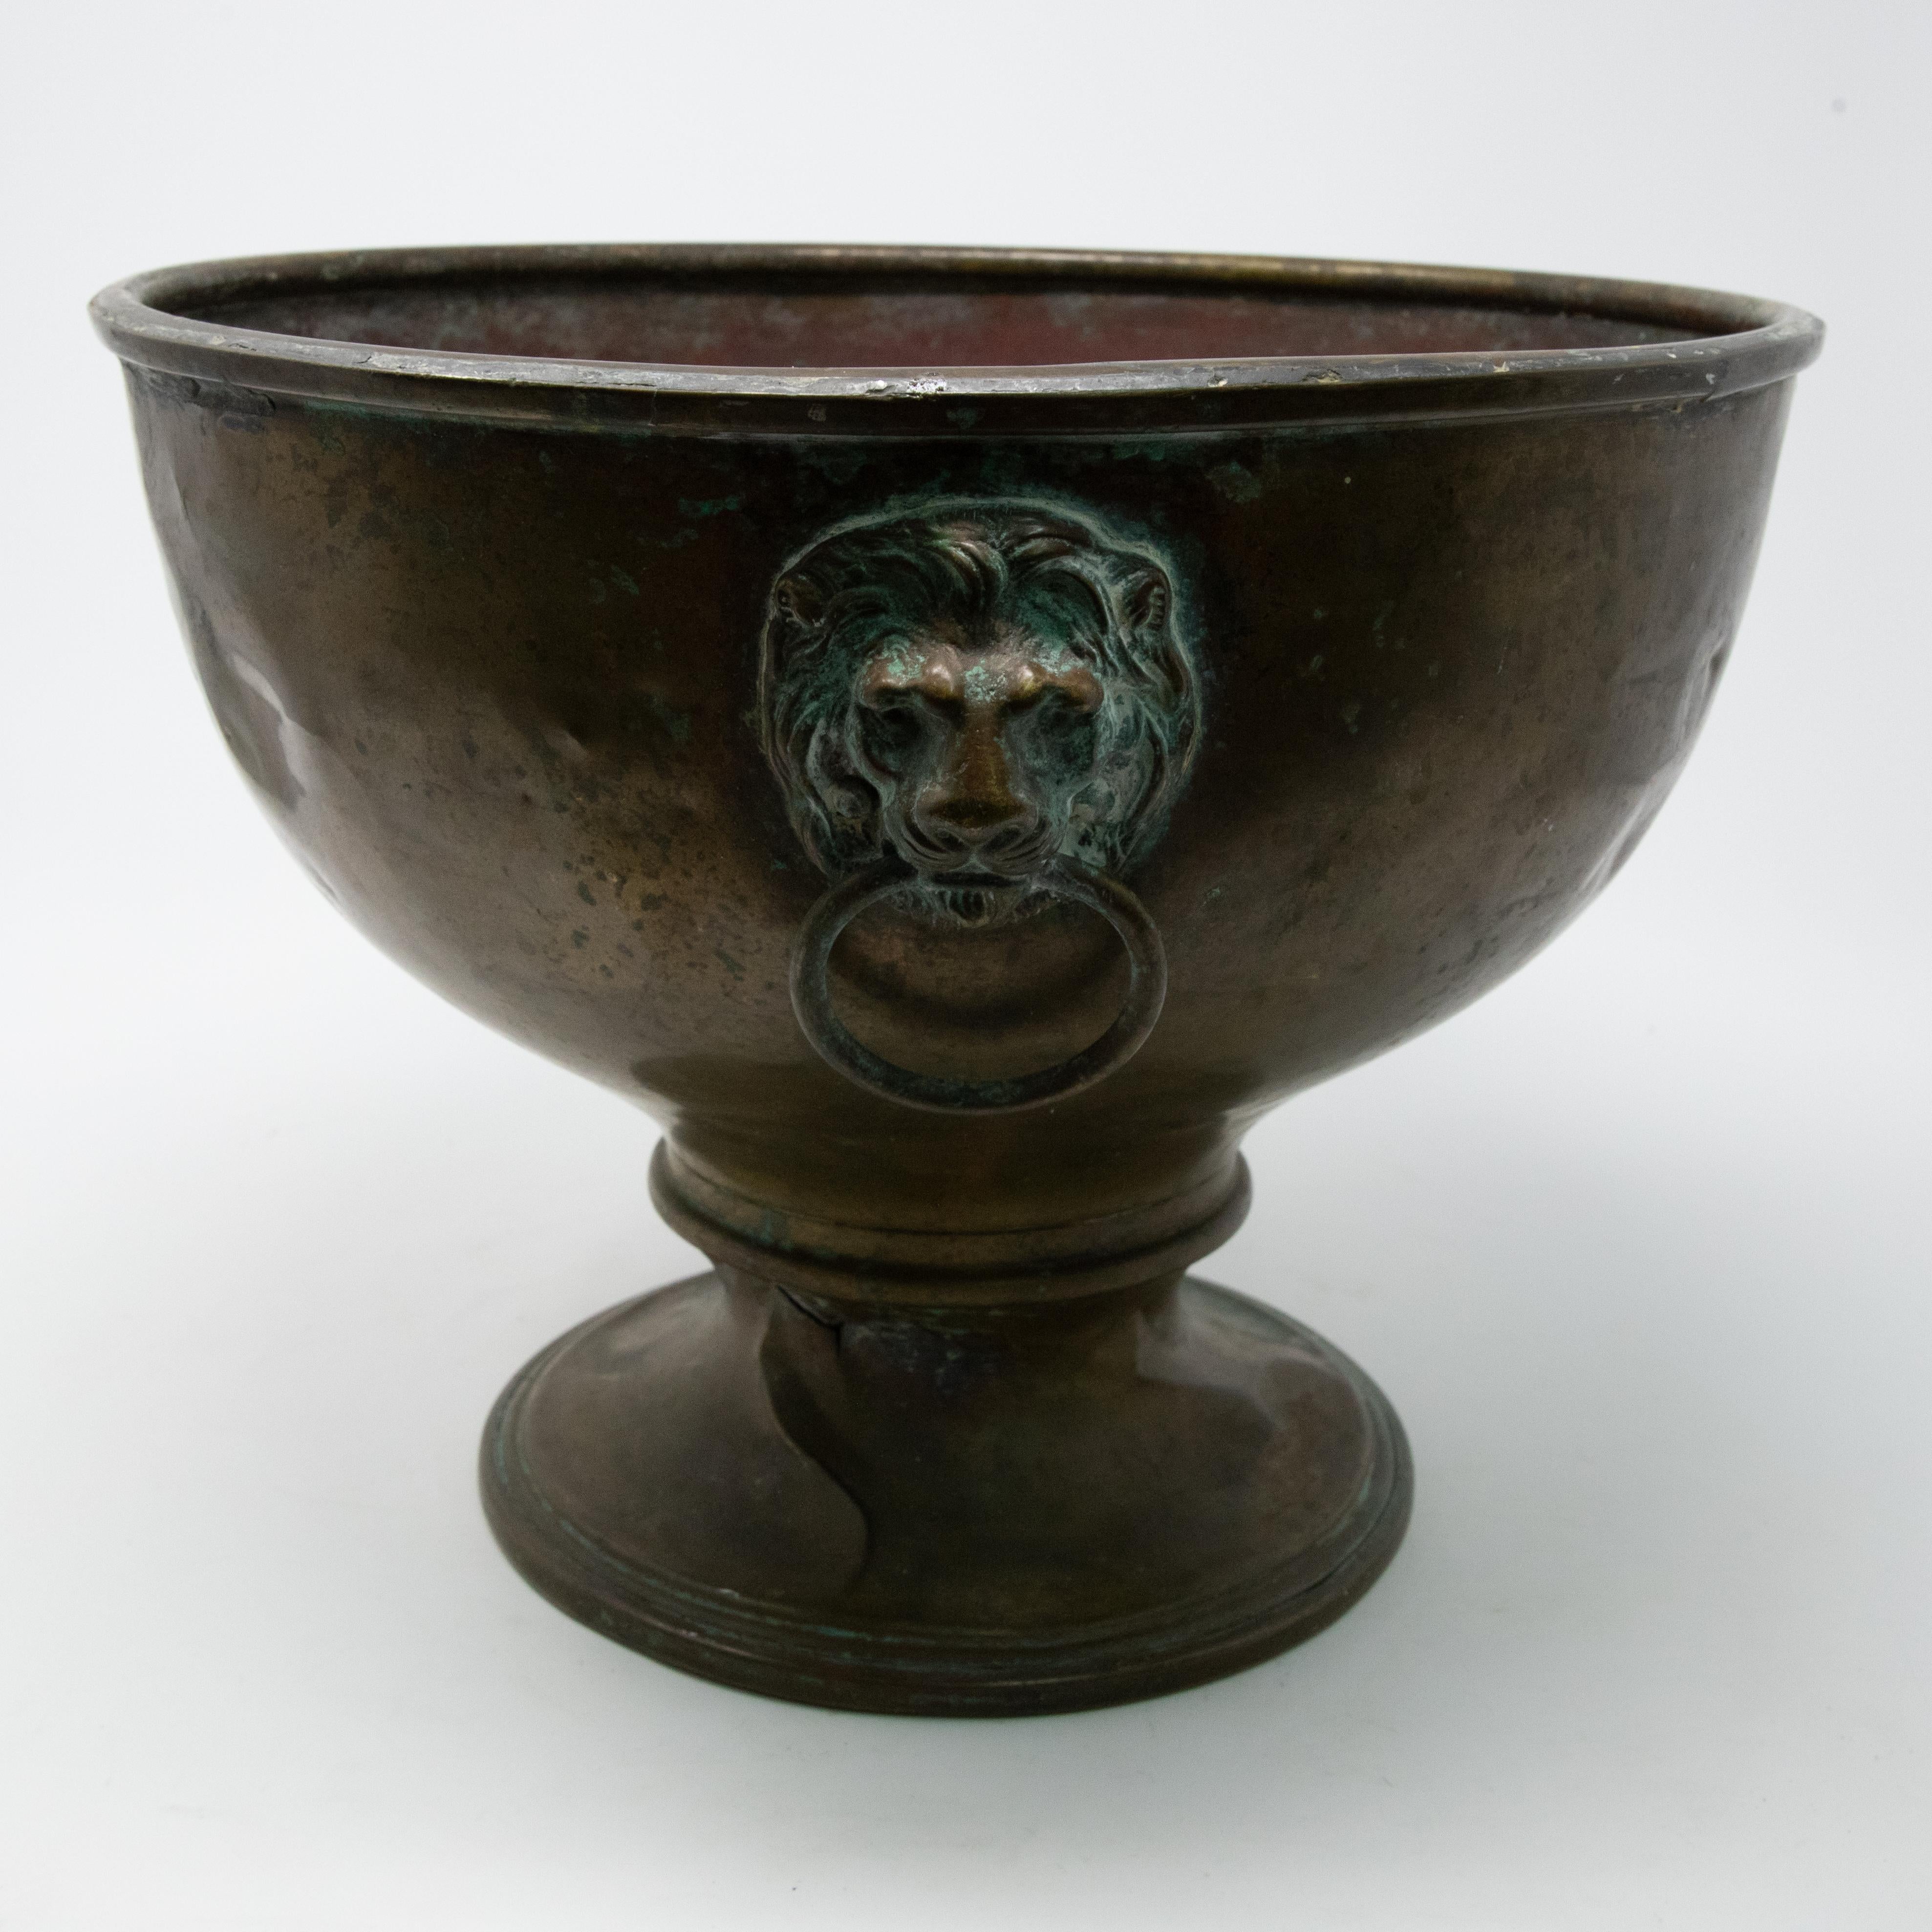 Offering this beautiful brass planter with lions heads. Starting on the bottom with a simple rounded plinth like base. From there graduates outward in a nice half spherical bowl. There are three lions heads placed around the planters body with rings